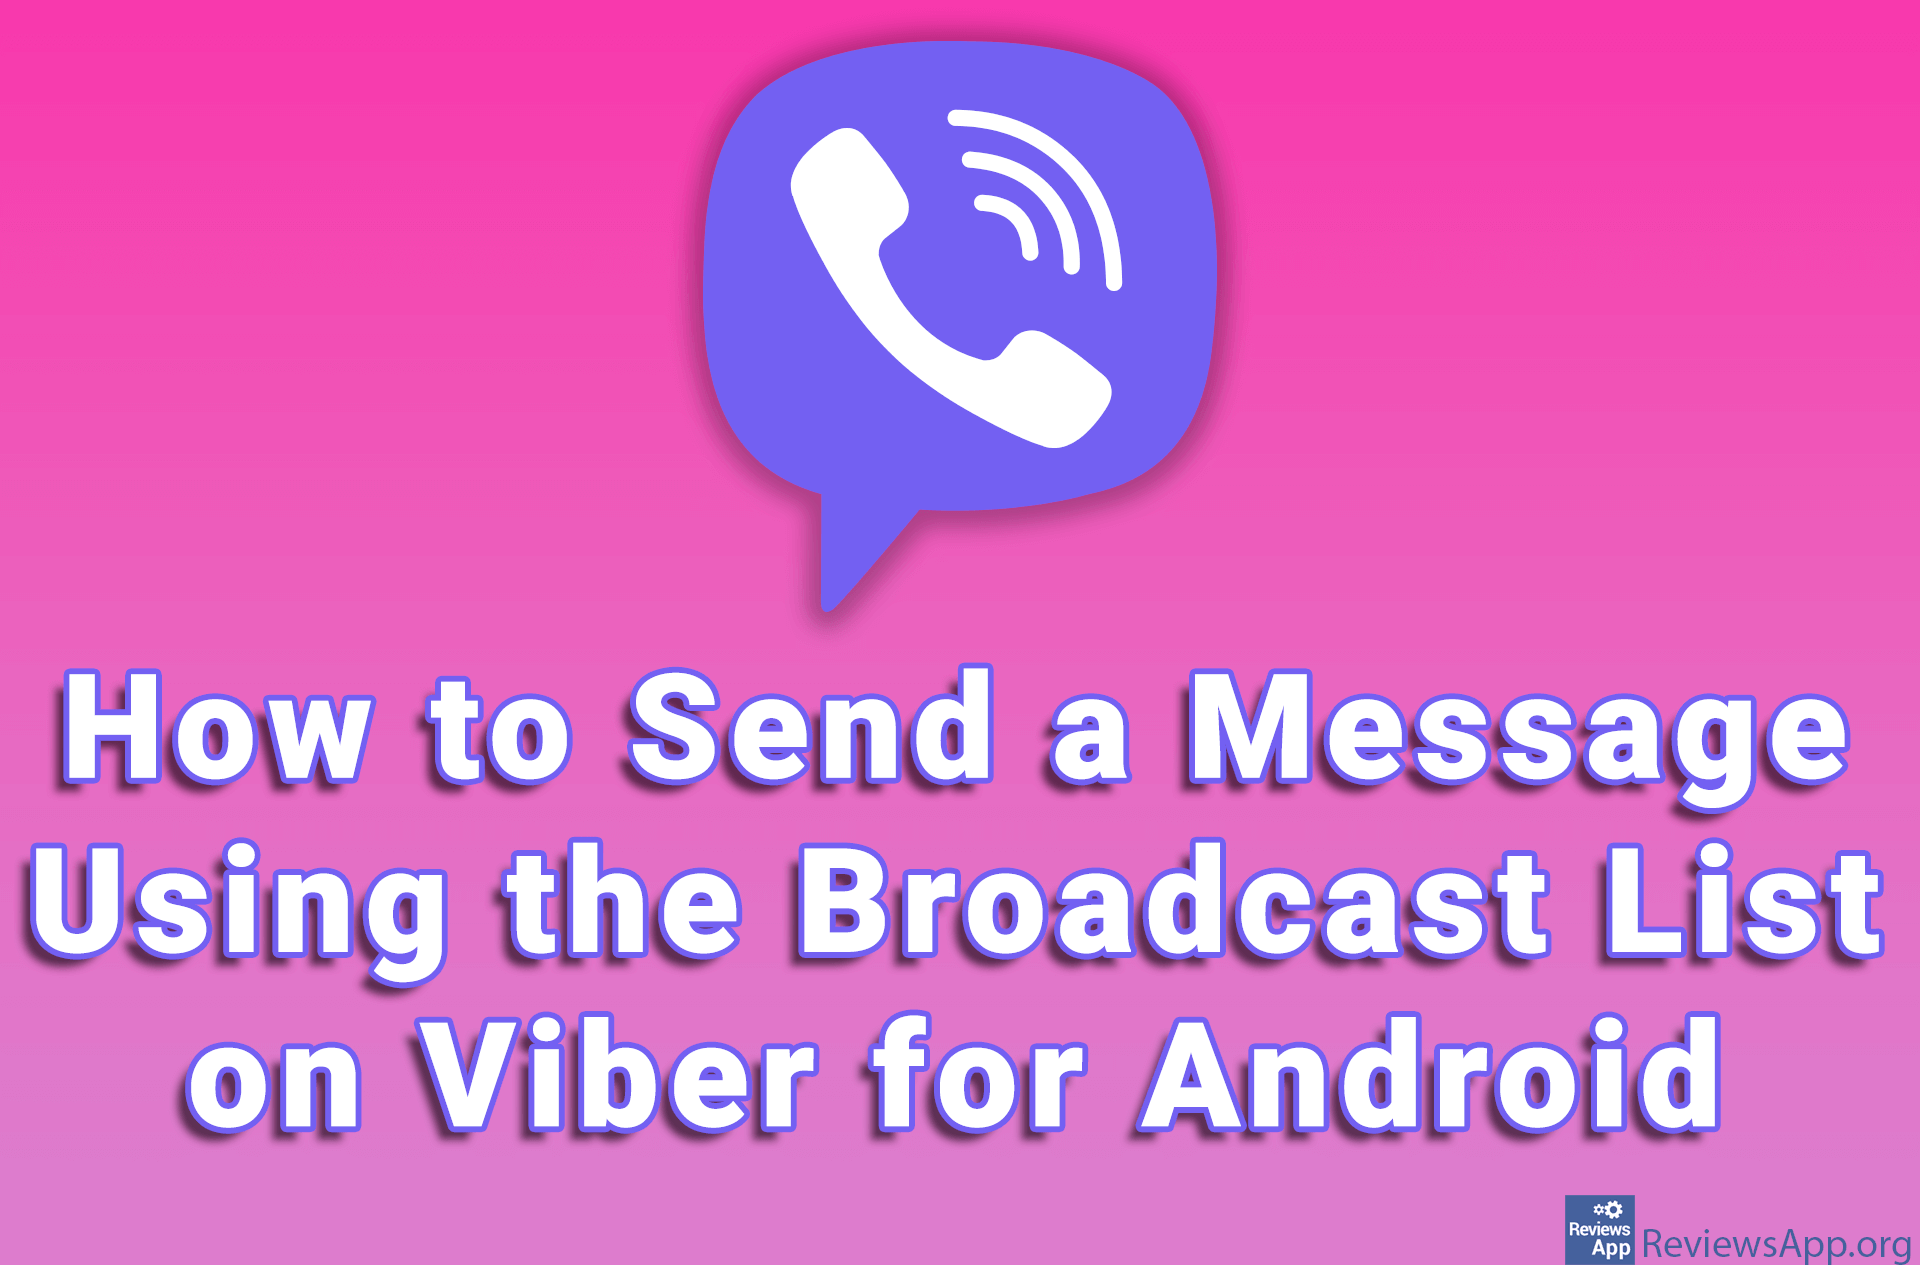 How to Send a Message Using the Broadcast List on Viber for Android